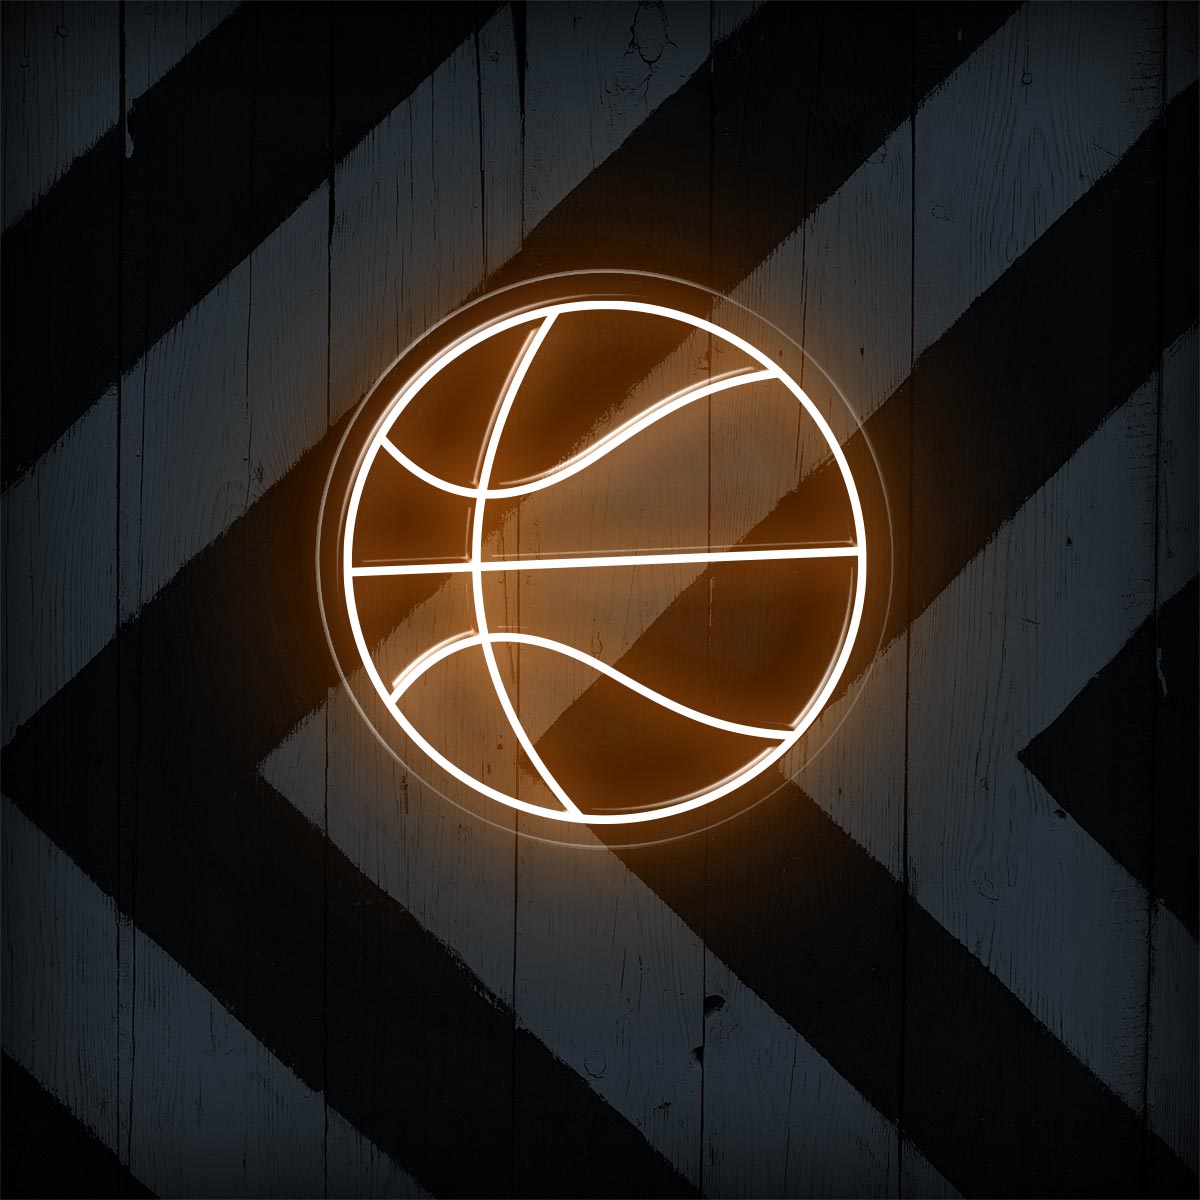 Basketball Neon Sign - Perfect for Game Rooms | Basketball gift - NEONXPERT